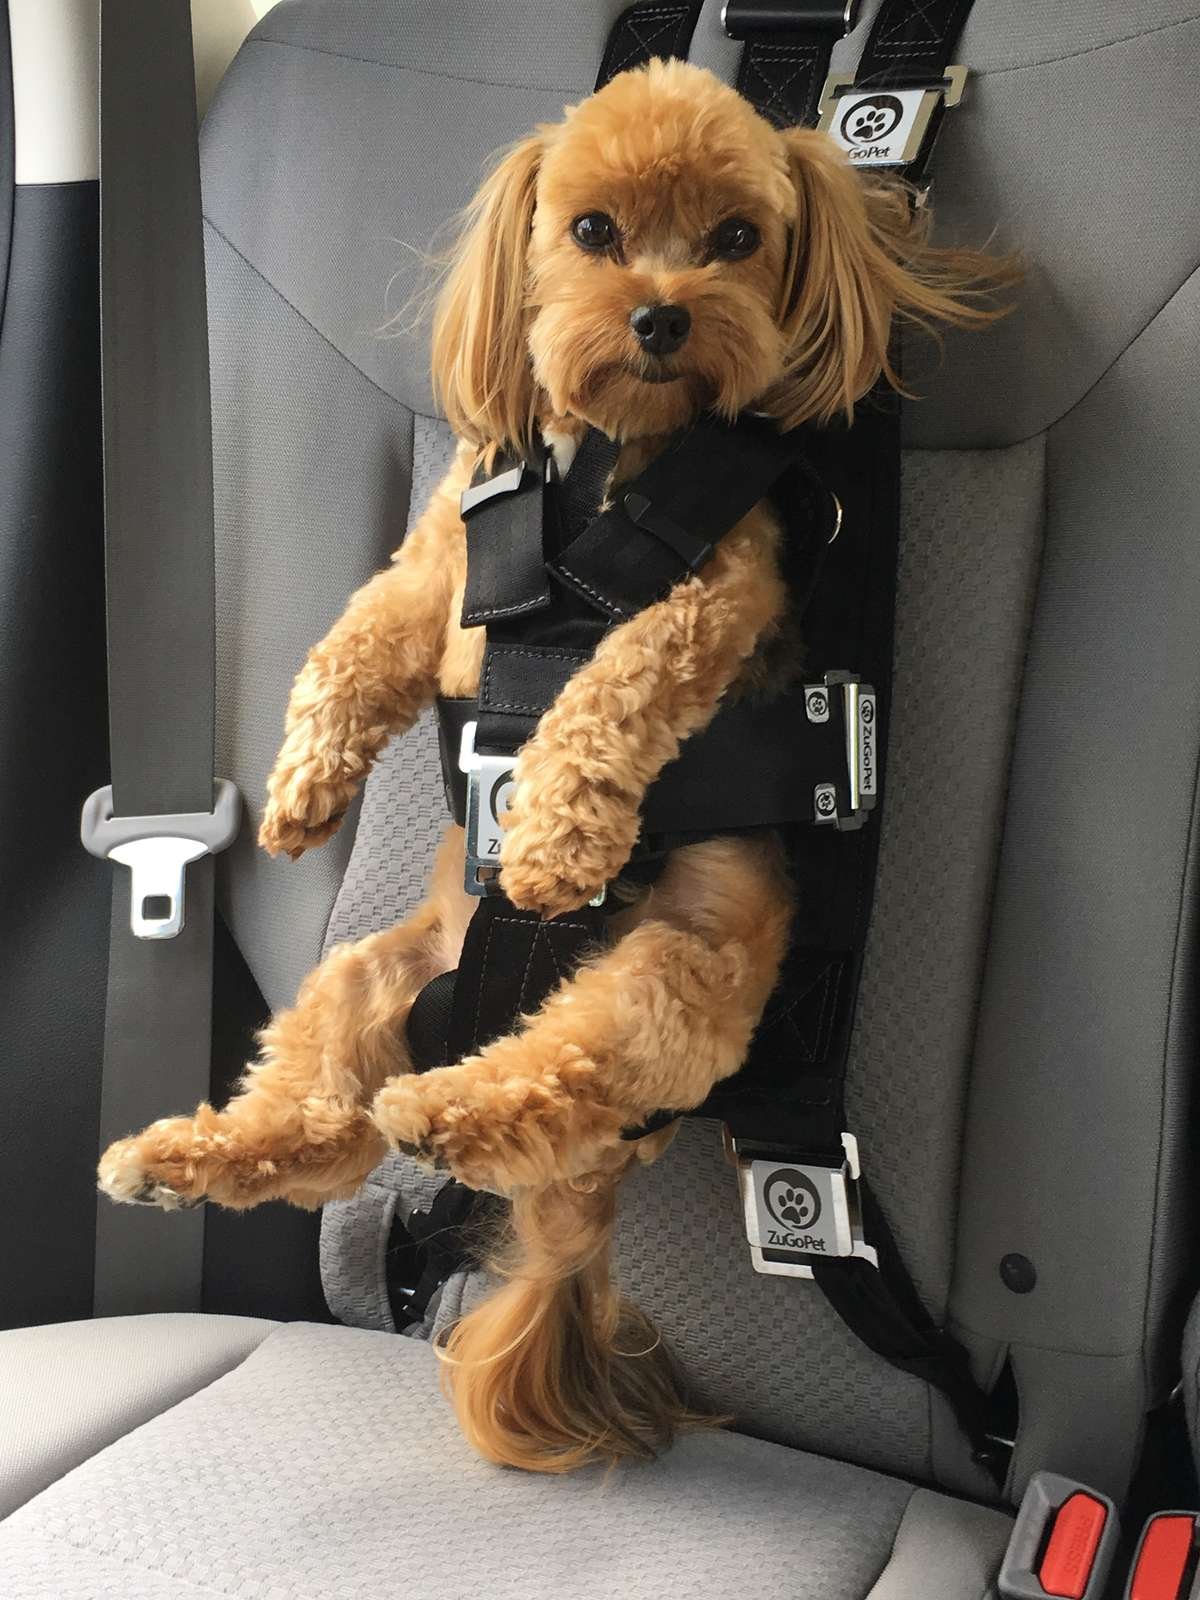 Safety Strap For Dog In Car